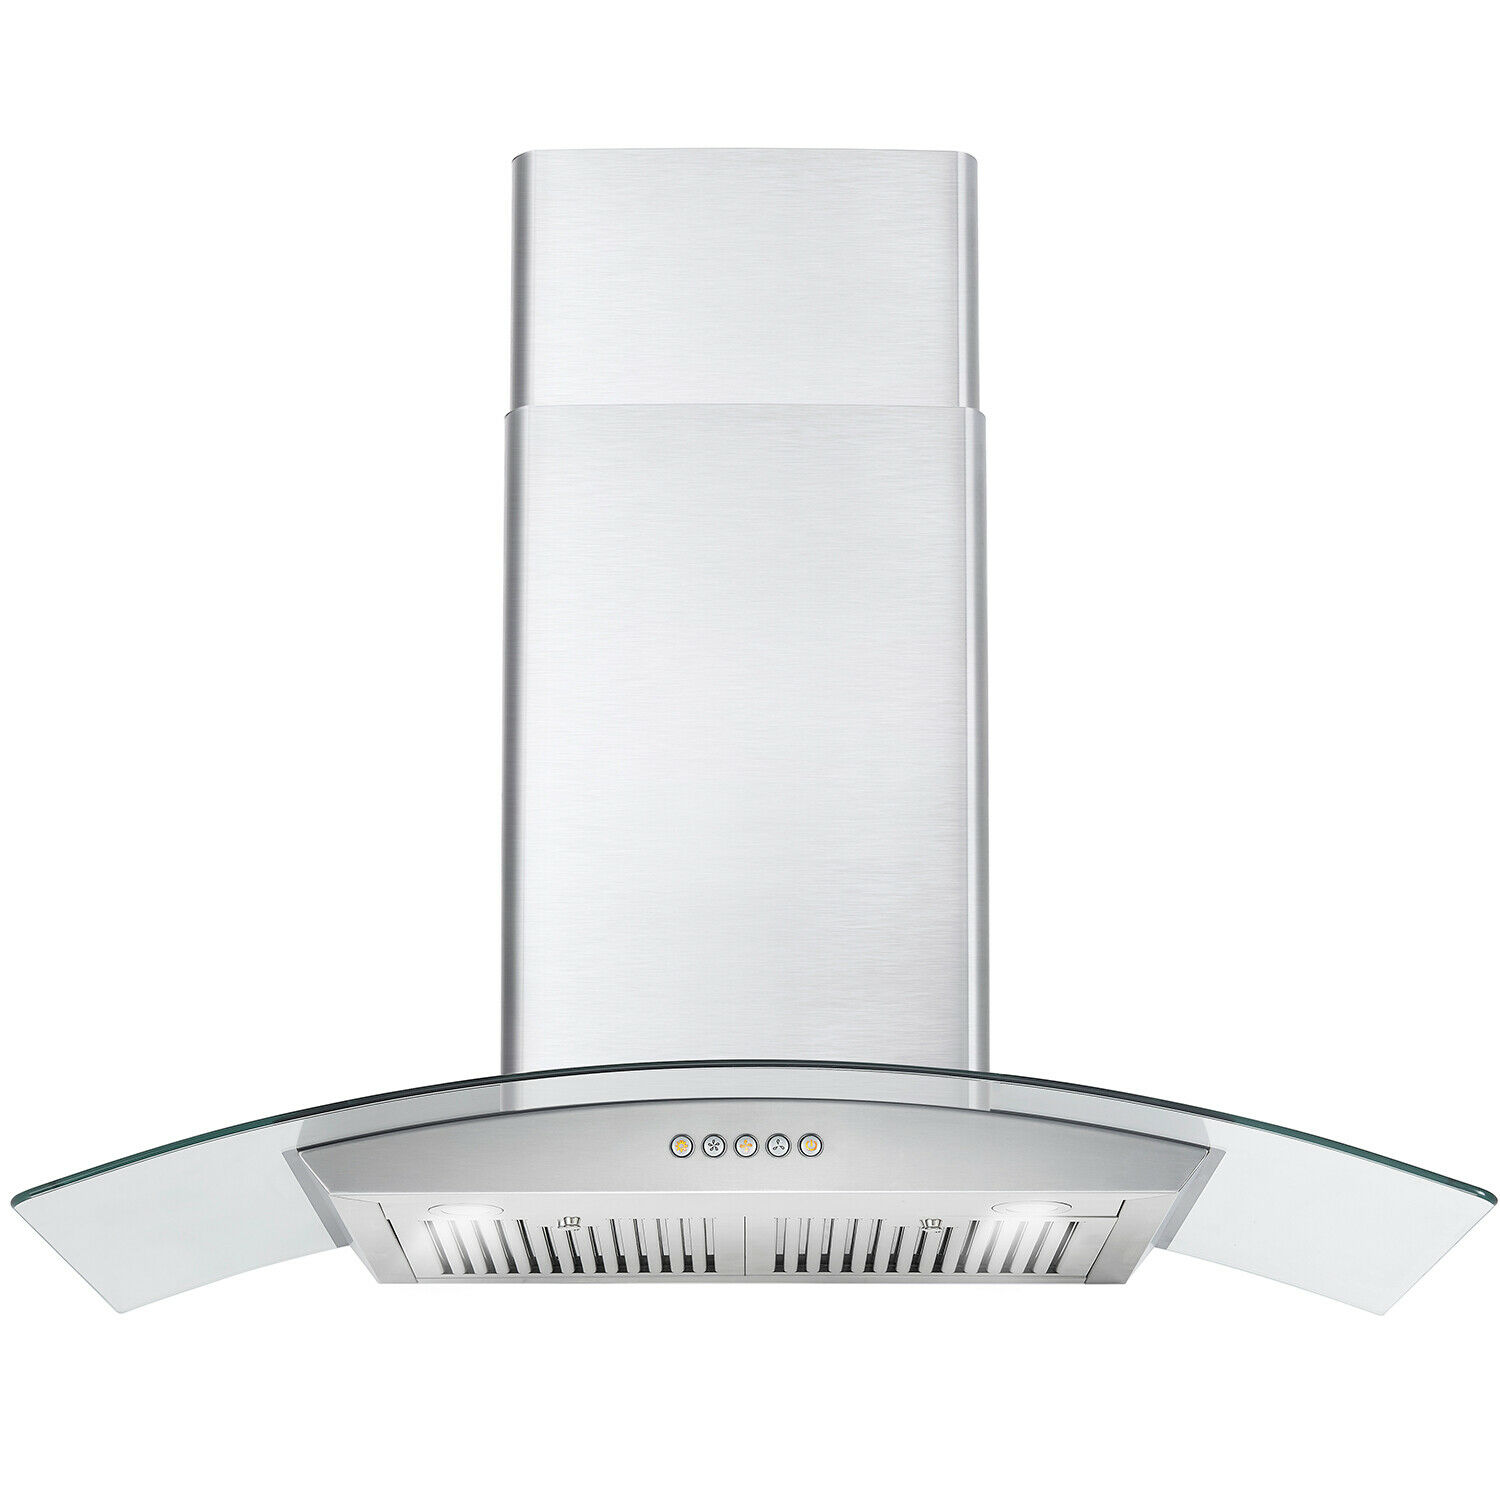 36 In. Ducted Wall Mount Range Hood W/ Button Controls, Stainless Steel Open Box